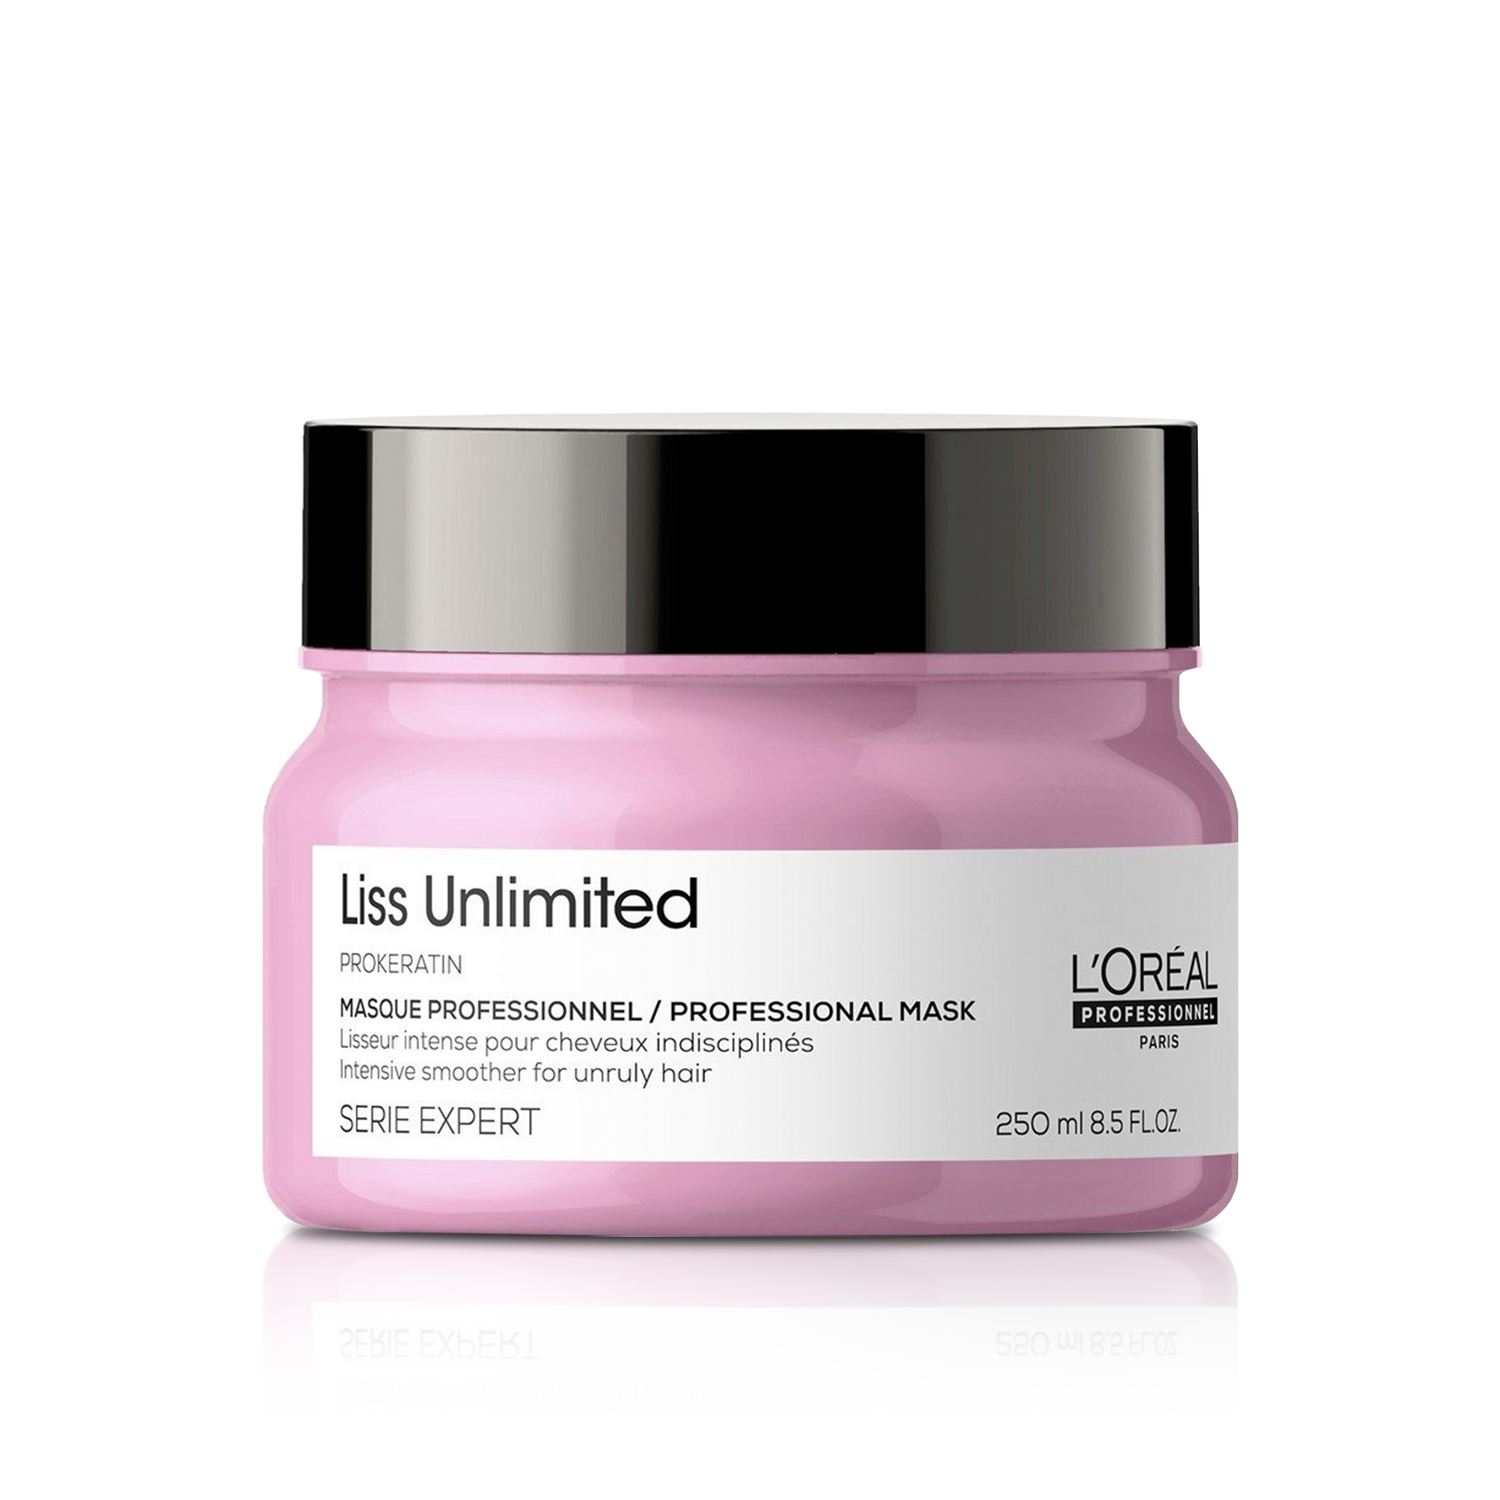 Liss Unlimited Prokeratin Professional Masque